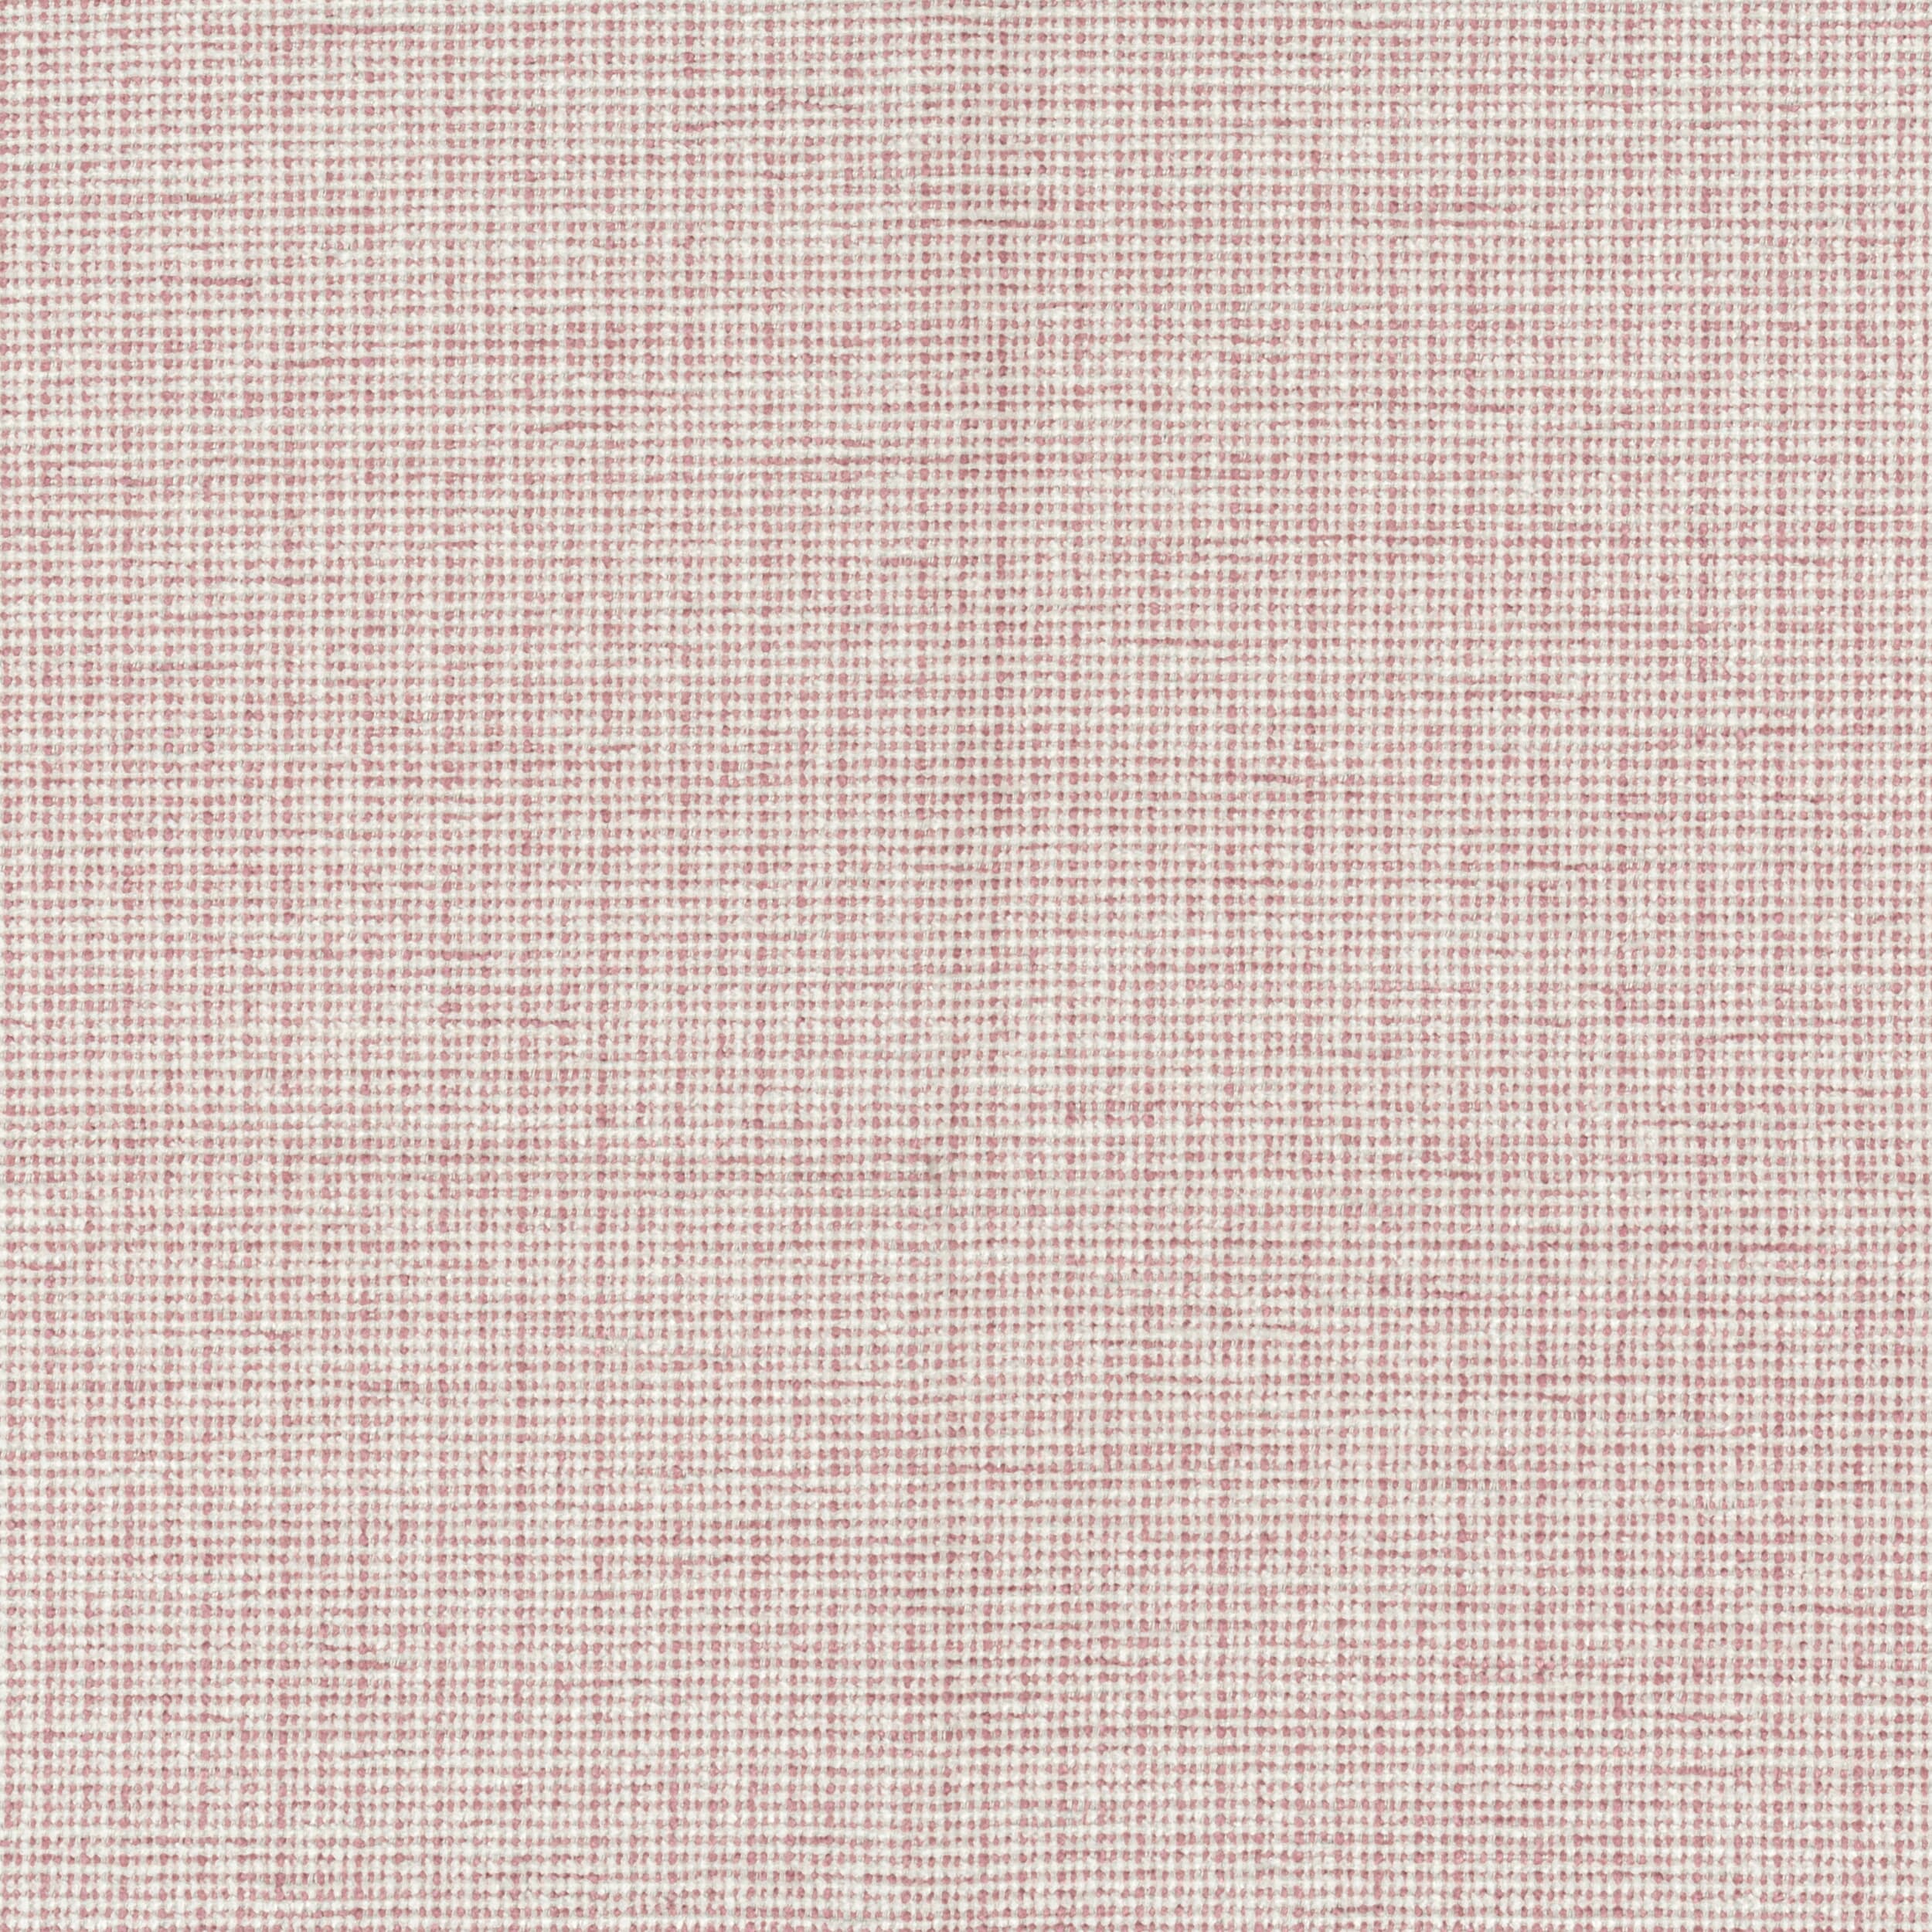 7804-5 Beginnings Sunset by Stout Fabric